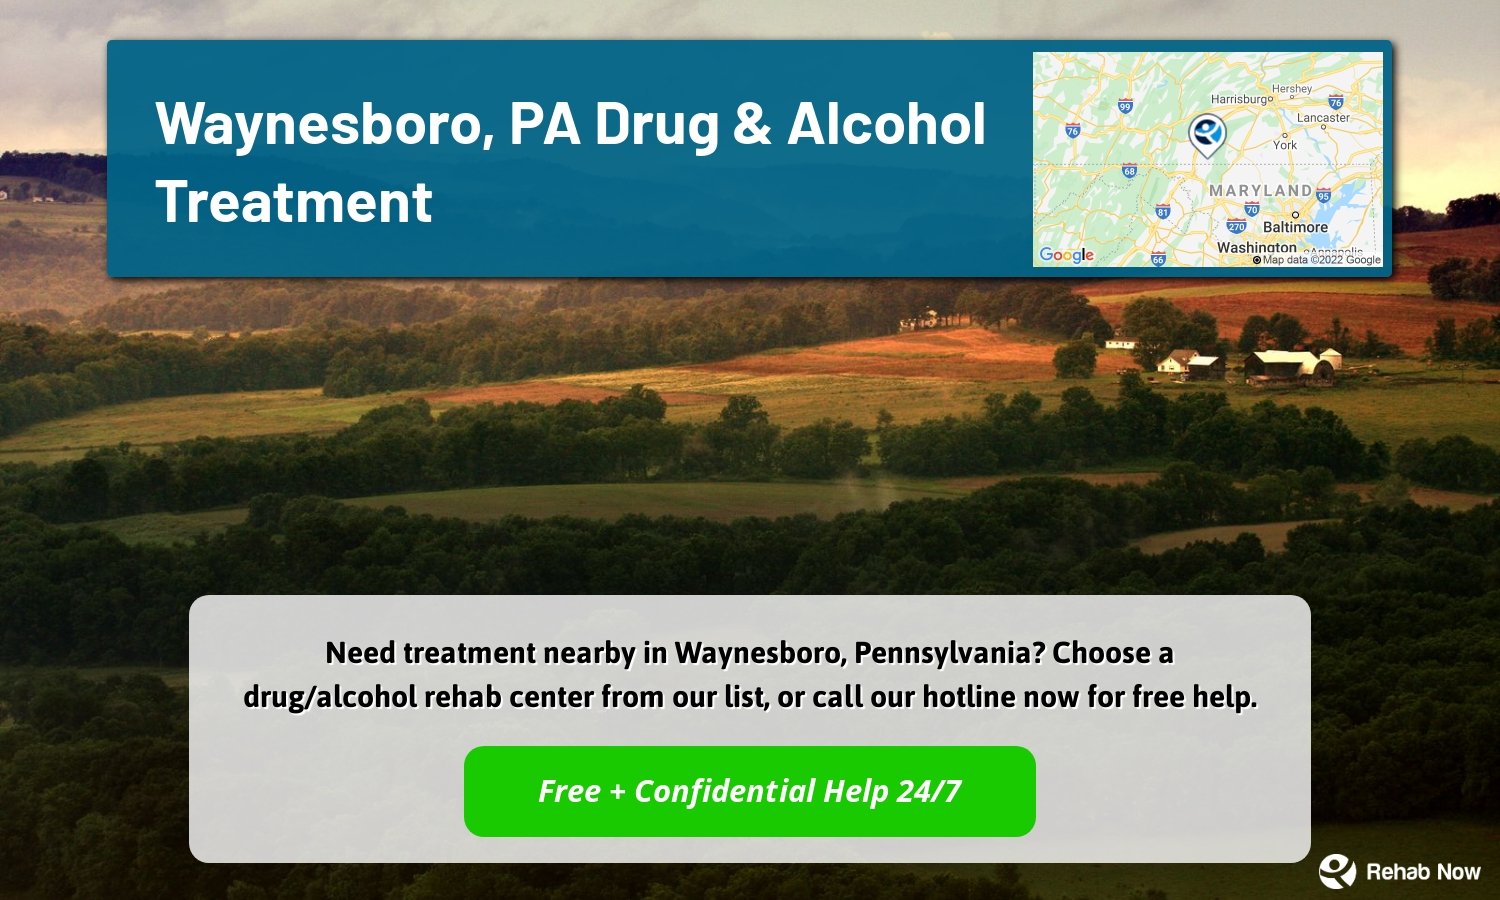 Need treatment nearby in Waynesboro, Pennsylvania? Choose a drug/alcohol rehab center from our list, or call our hotline now for free help.